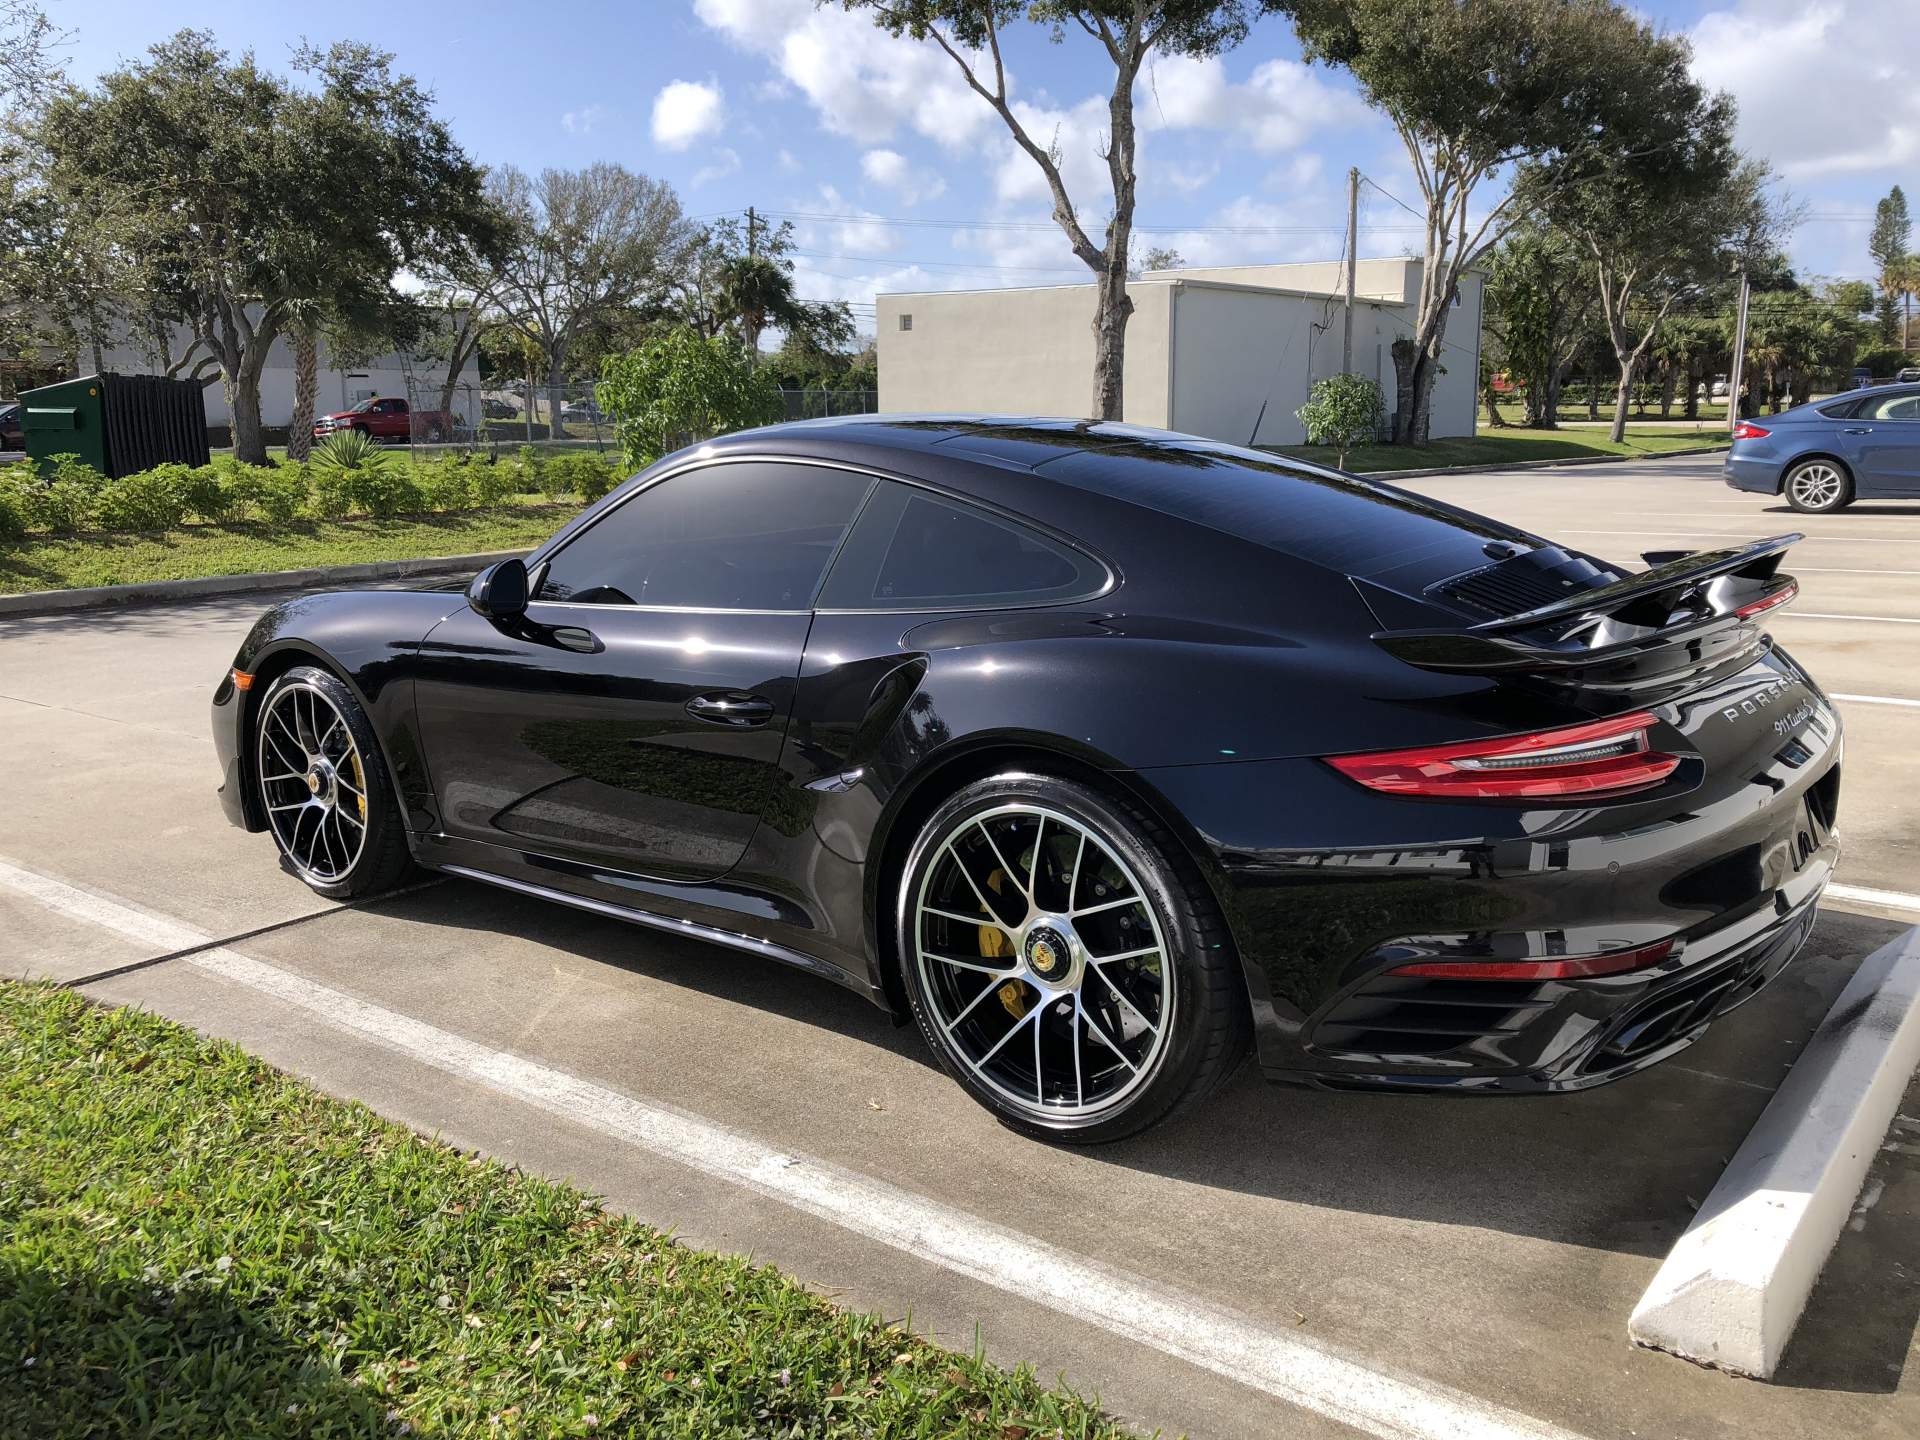 Black Porsche from the side